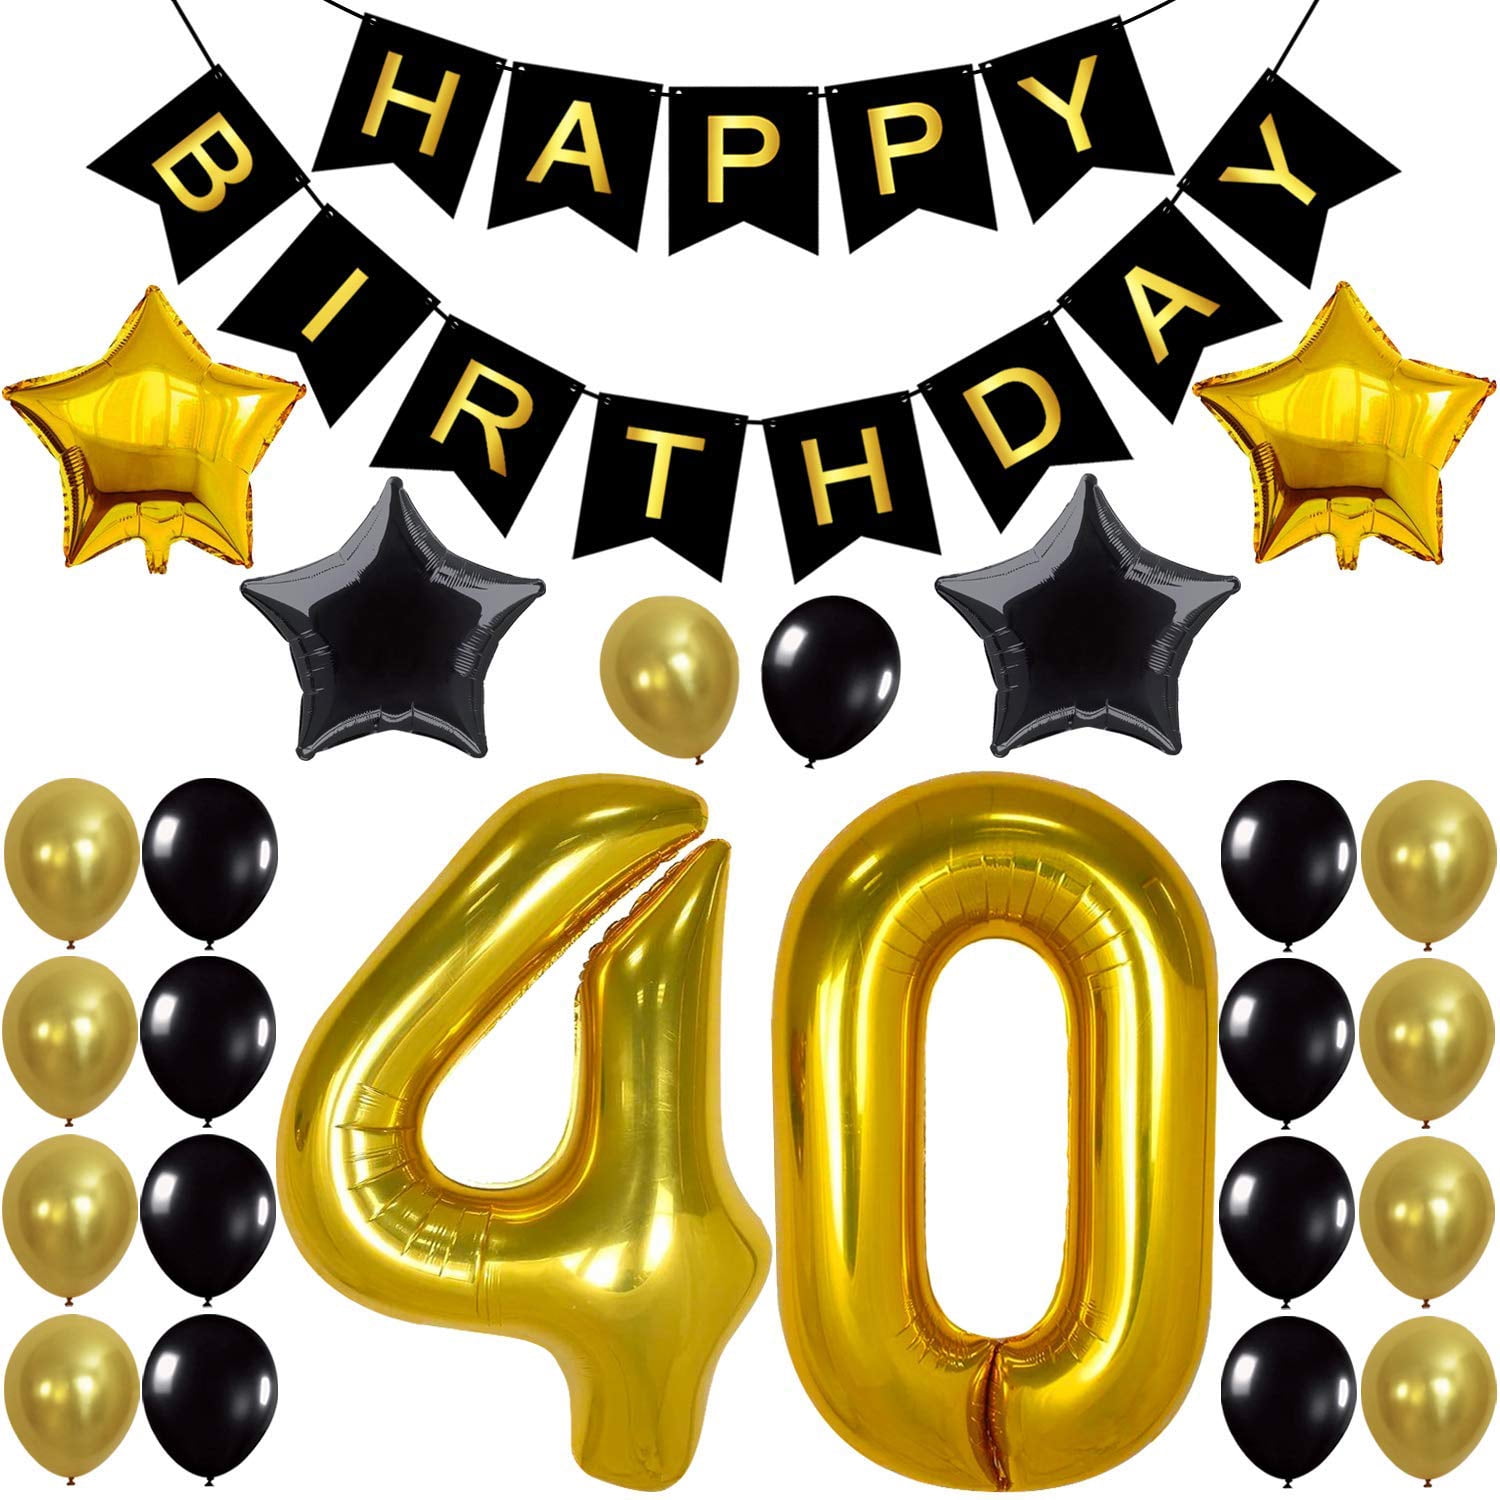 Gold & Silver 40" Letter Foil Balloons Birthday Party "HAPPY BIRTHDAY" Decor